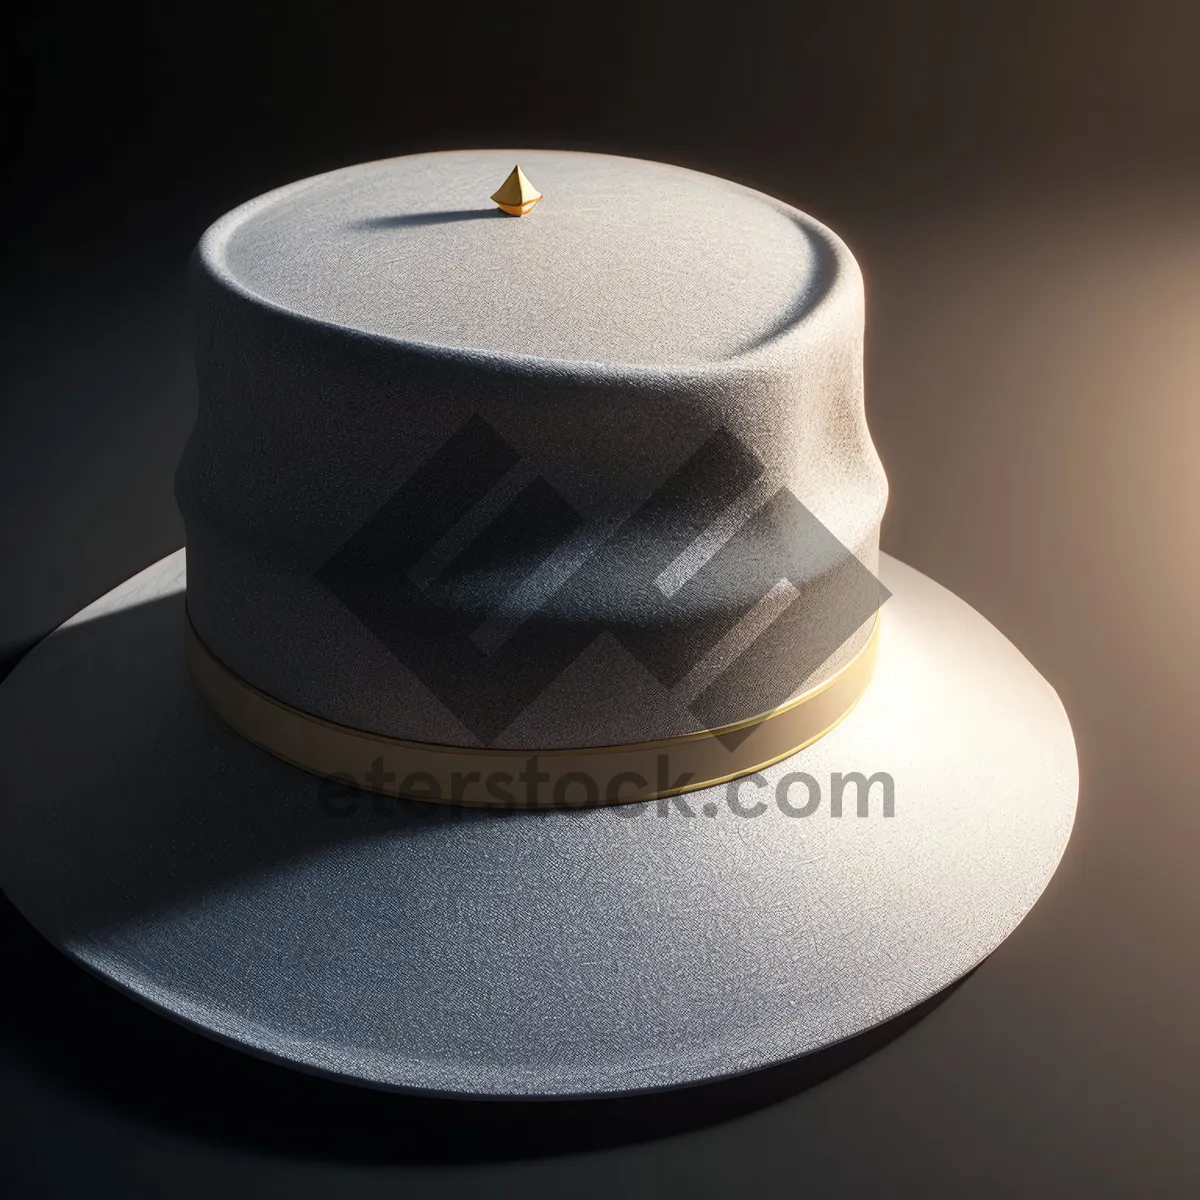 Picture of Cup of Sorcery: A Magical Coffee Beverage Served with a Saucer